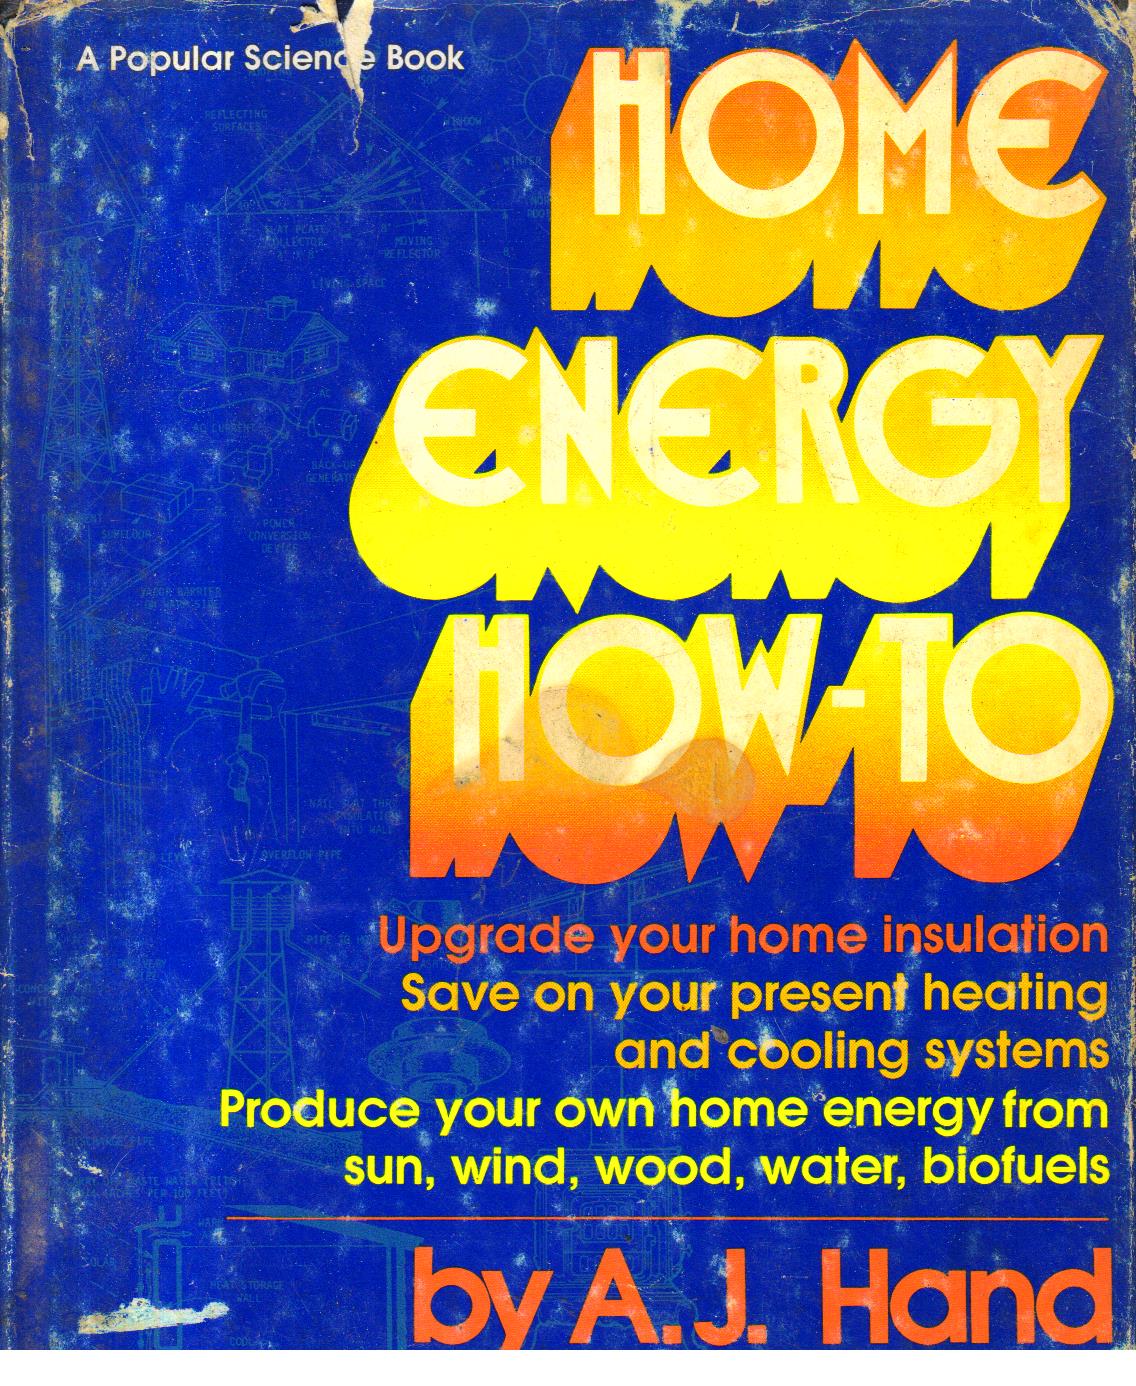 Home Energy How to.